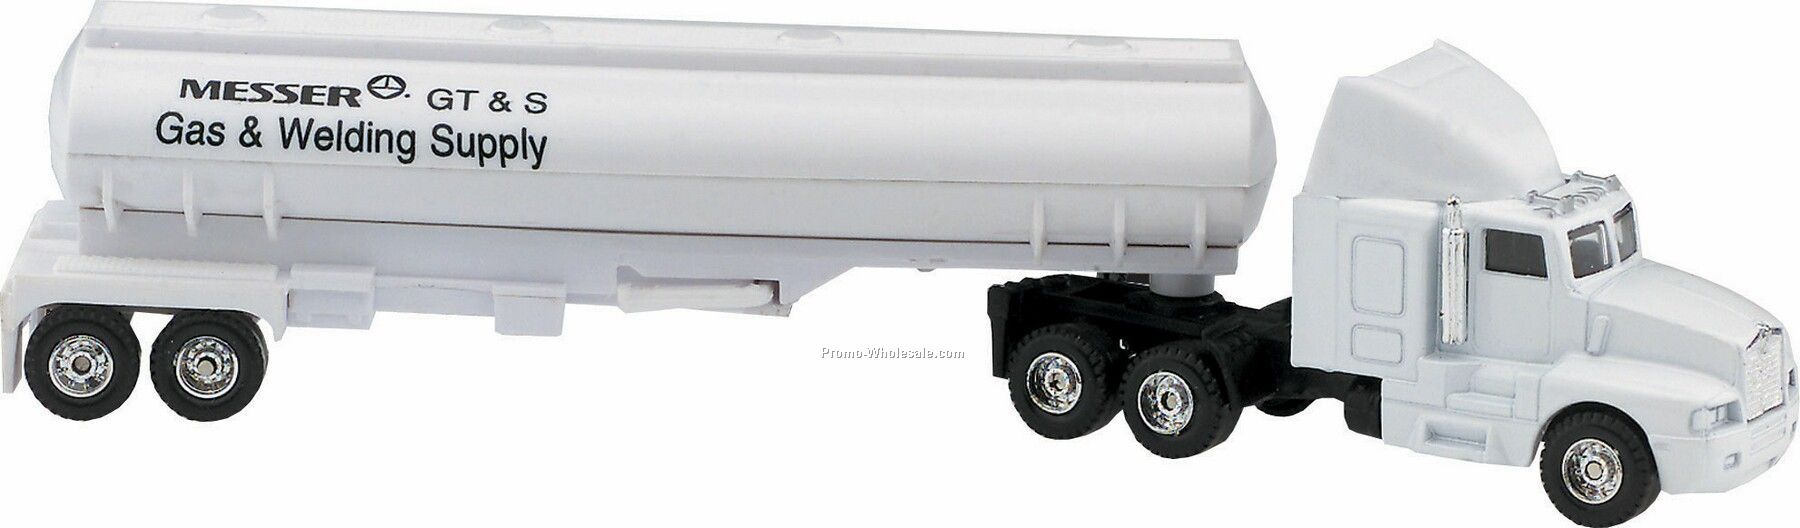 7" Die Cast Conventional Hauler Truck With Tanker